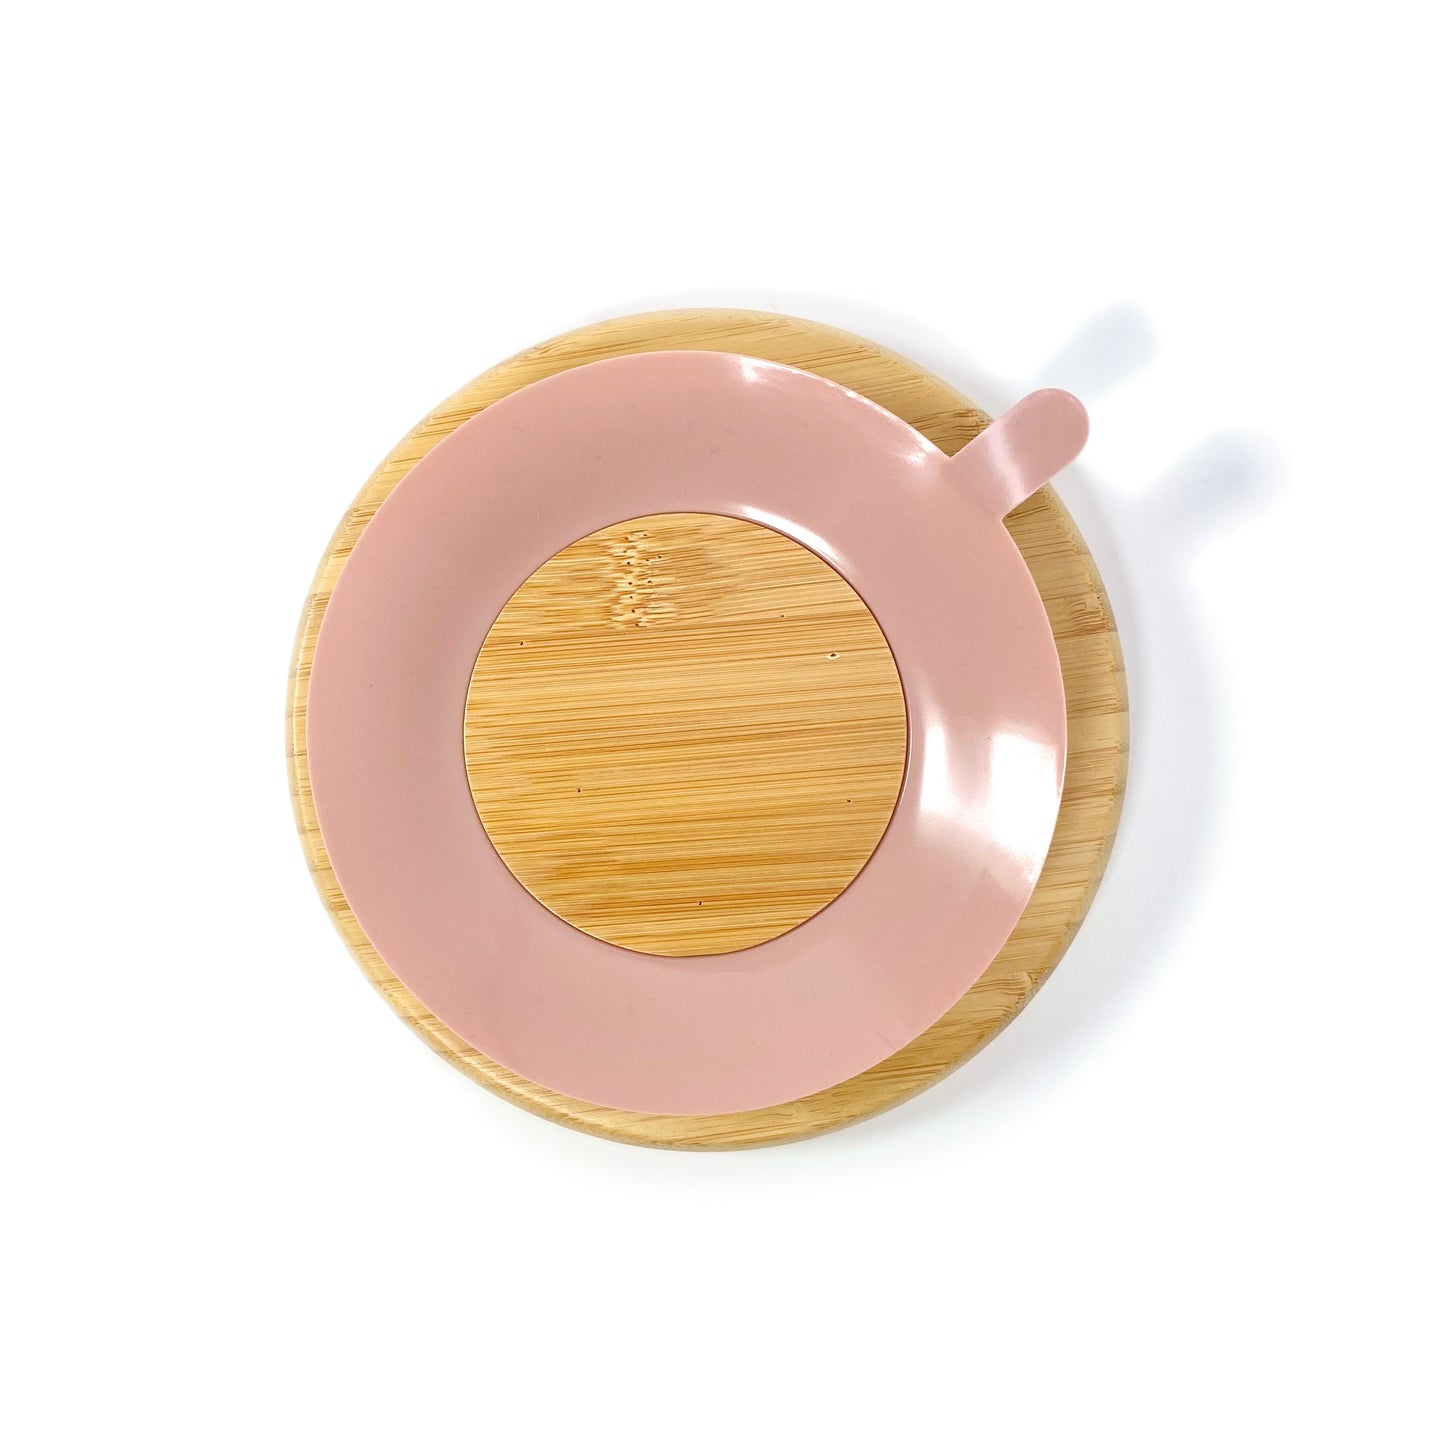 A children’s bamboo section plate with blossom pink silicone suction ring on the base. Back view, featuring the blossom pink silicone suction ring.